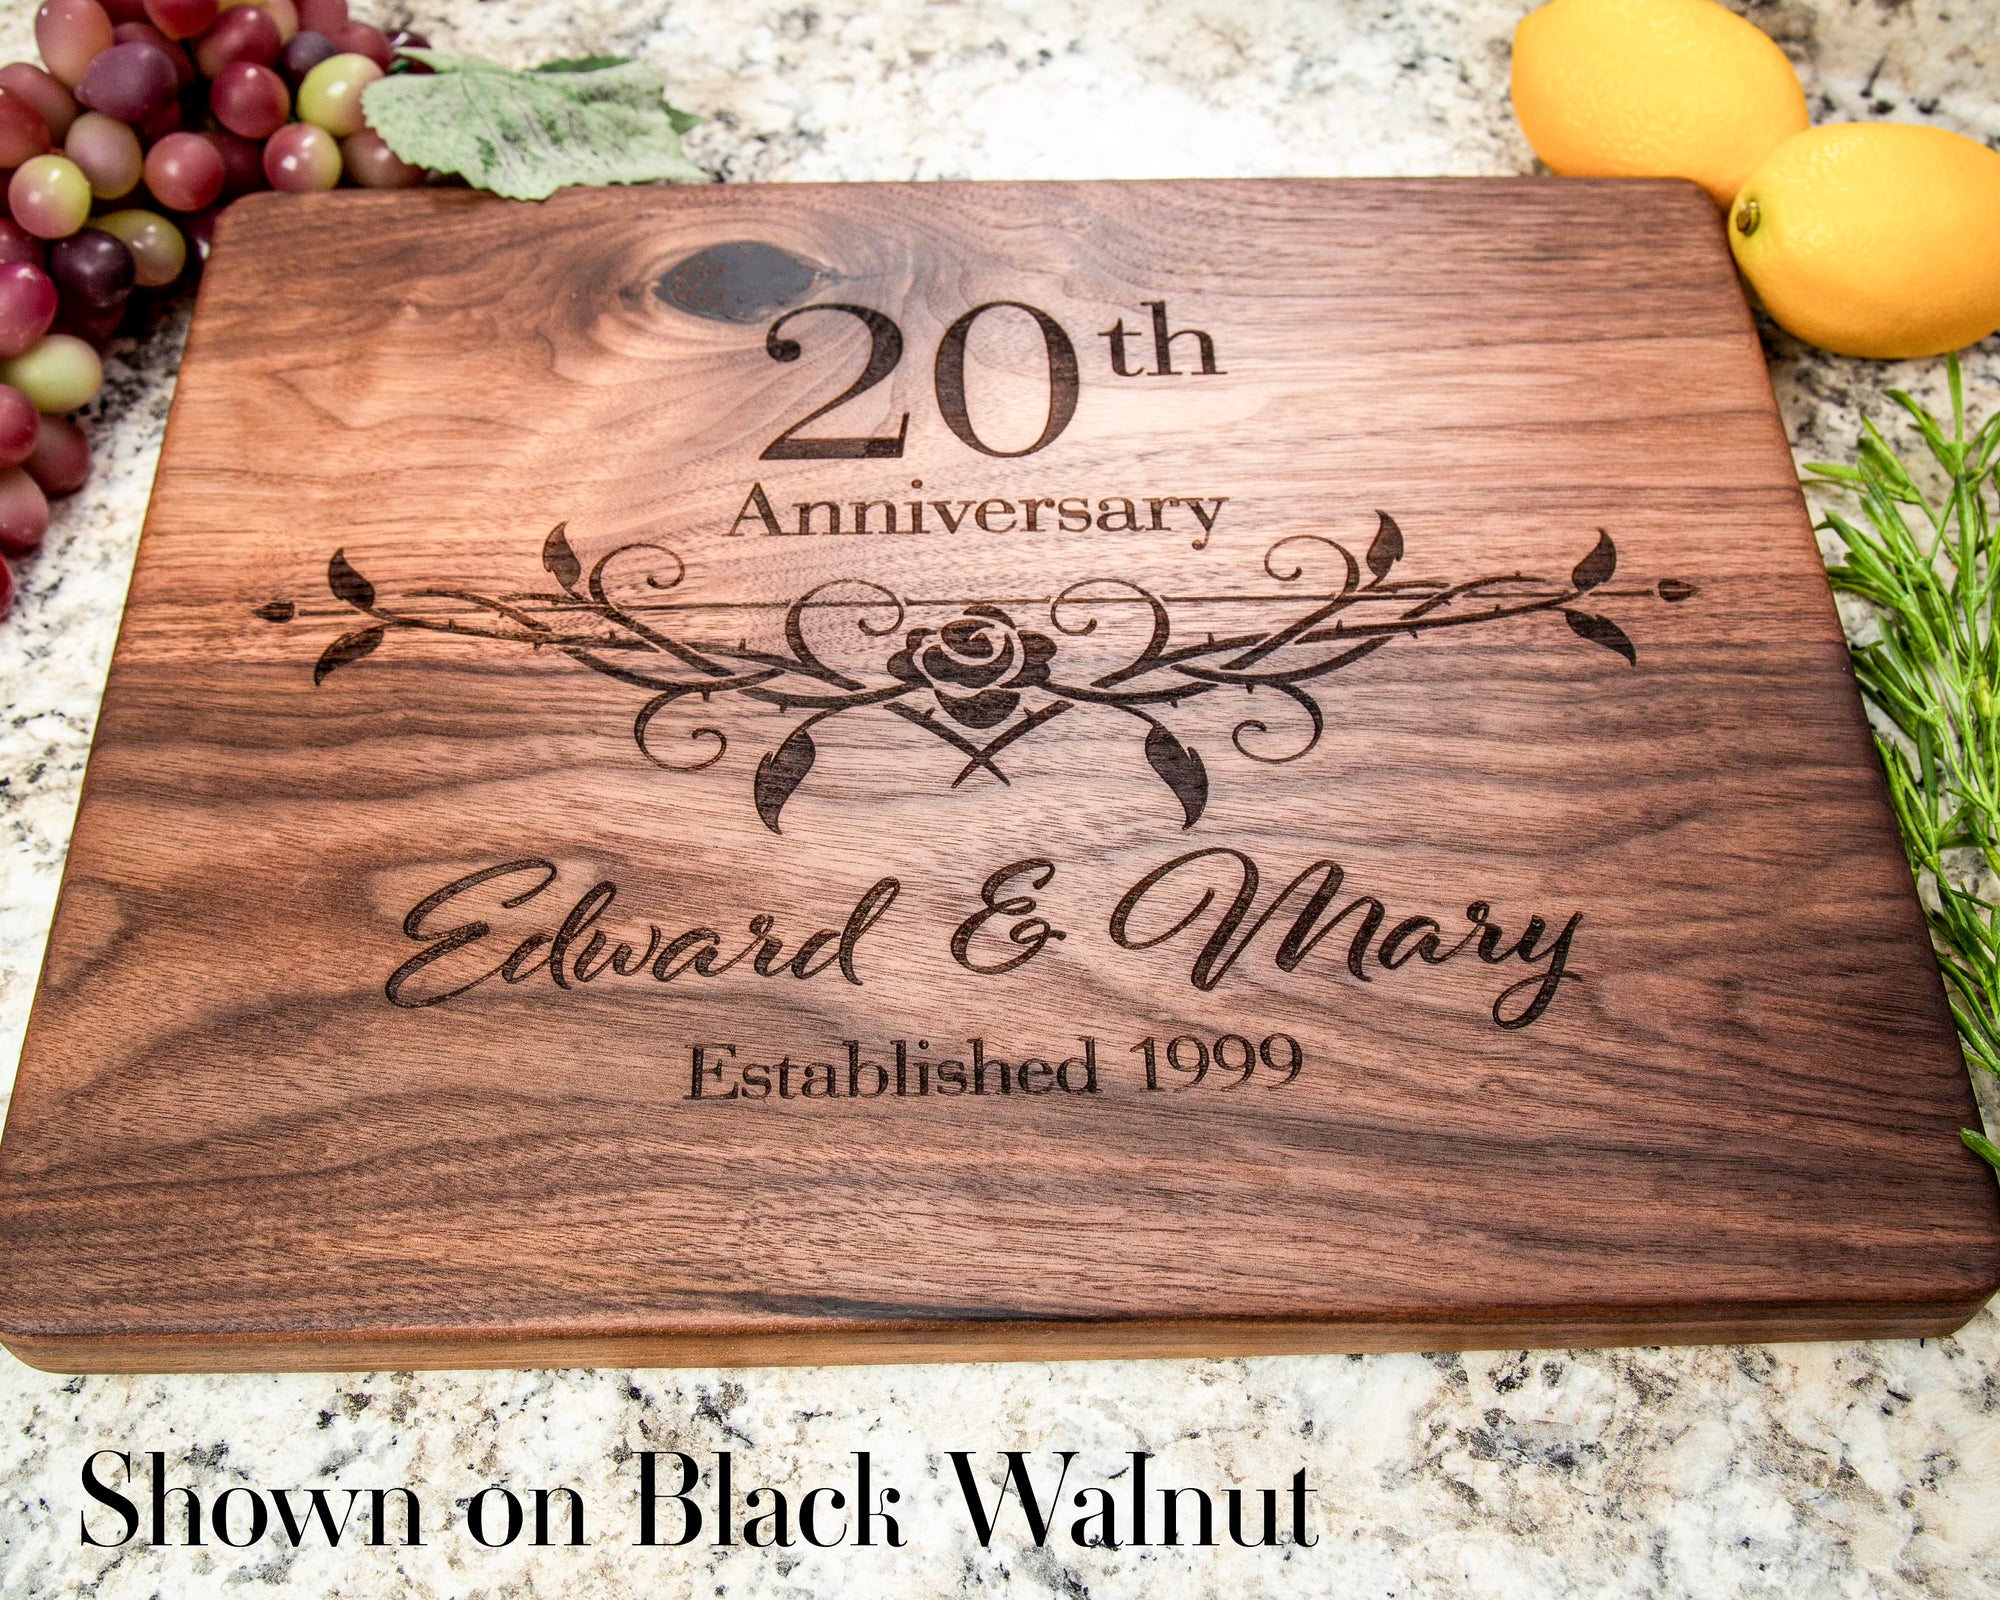 Show your enduring love and admiration this anniversary by giving your special someone this exquisite 20th Anniversary Couples Gift. This timeless and sophisticated present is the perfect way to commemorate two decades of dedication. Celebrate your eternal bond in an elegant way!